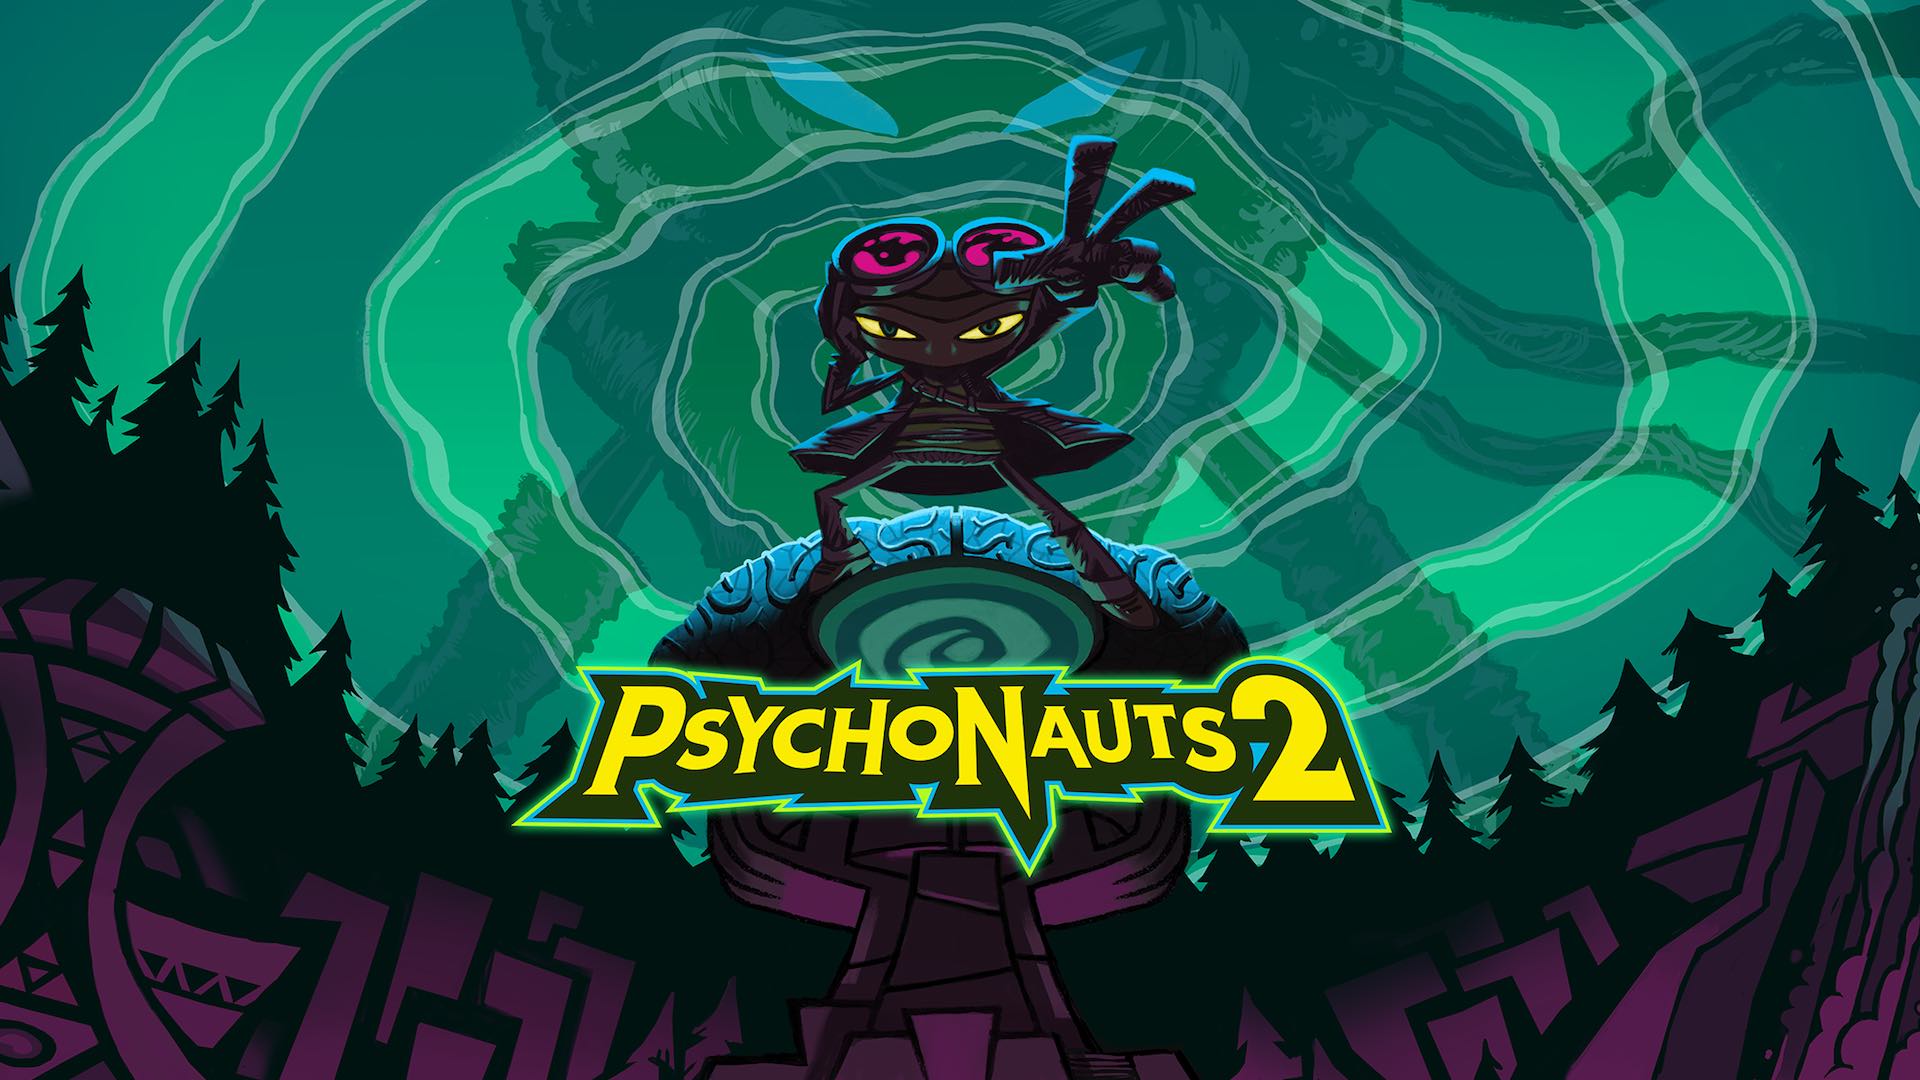 the promotional art for psychonauts 2. it features raz in his classic psychic stance over a dark purple landscape of woods and buildings with a teal spiral making up the sky. the logo for the game sits over the brain he is standing on, and the shadow of maligula looms behind him